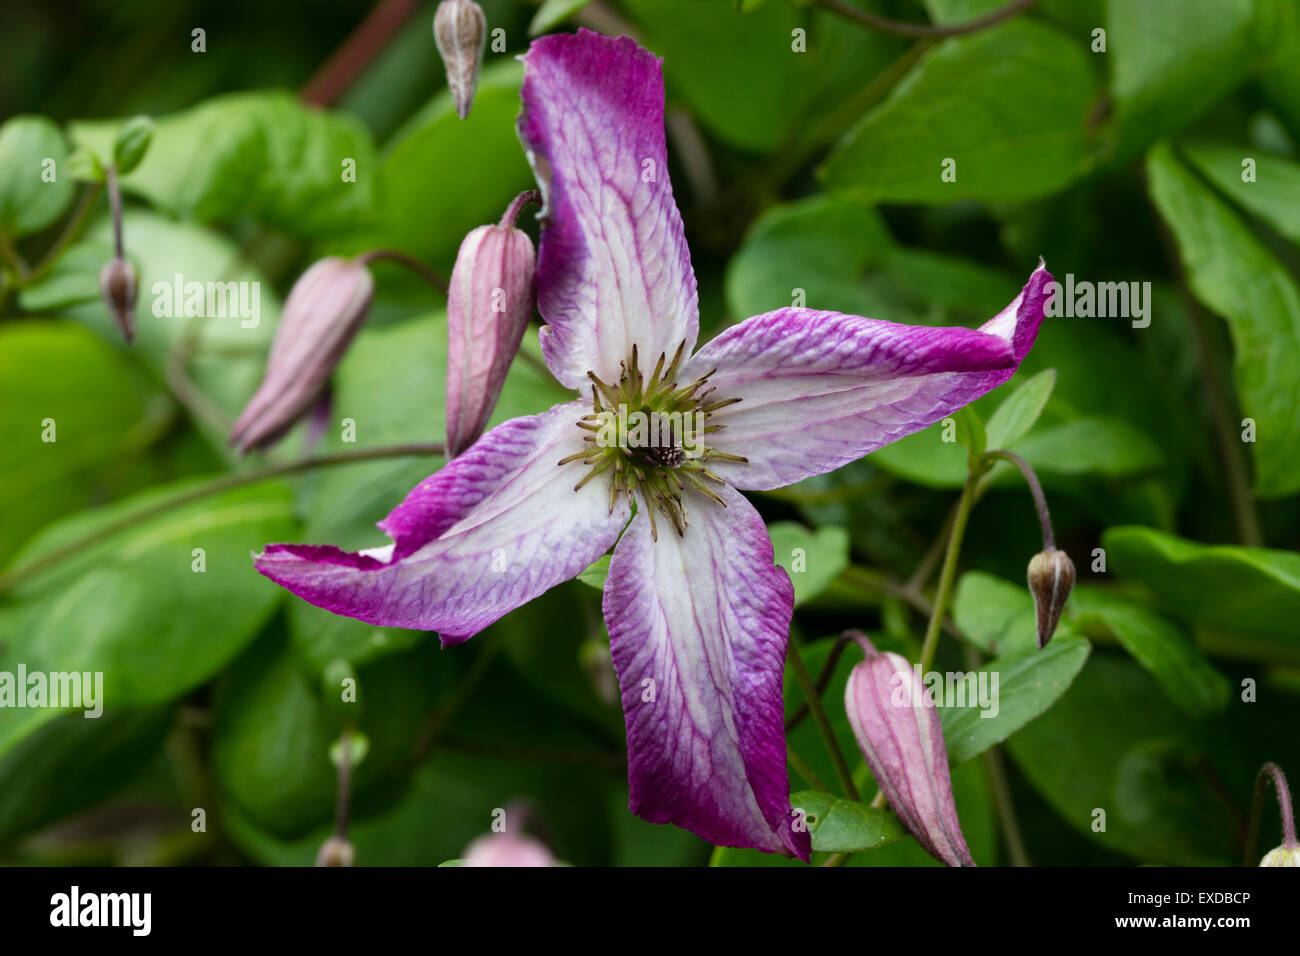 Flower of the hardy, July to September blooming climber, Clematis viticella 'Minuet' Stock Photo